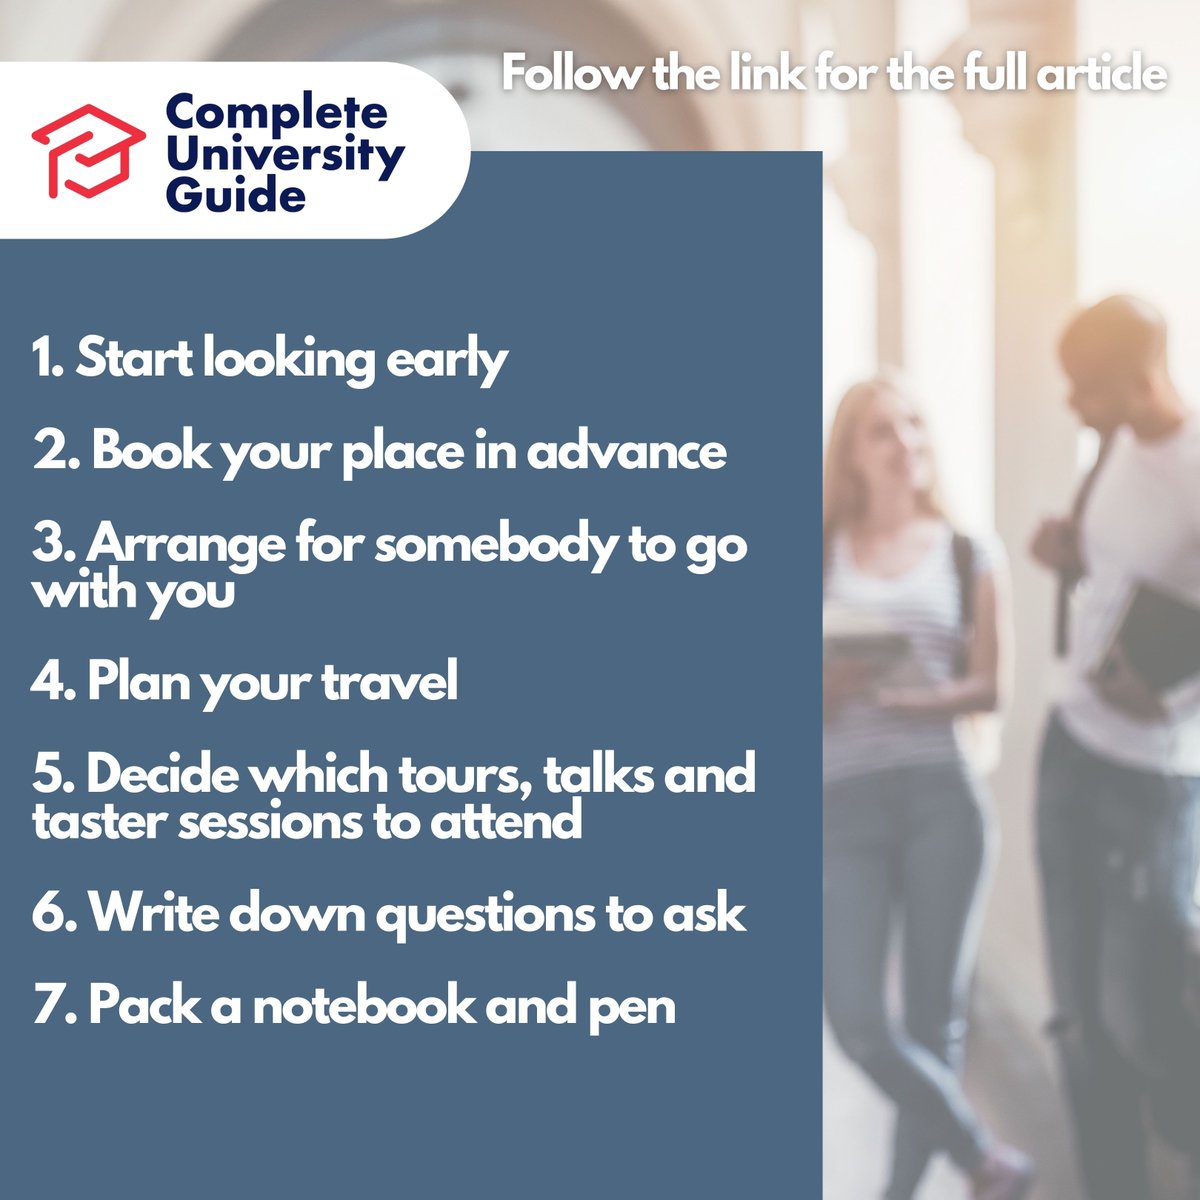 Attending a university open day will help you narrow down your course choices when applying to university. Here's how to begin.

Article 👉 bit.ly/4cWNRpk

#opendays #university #students #study #openday